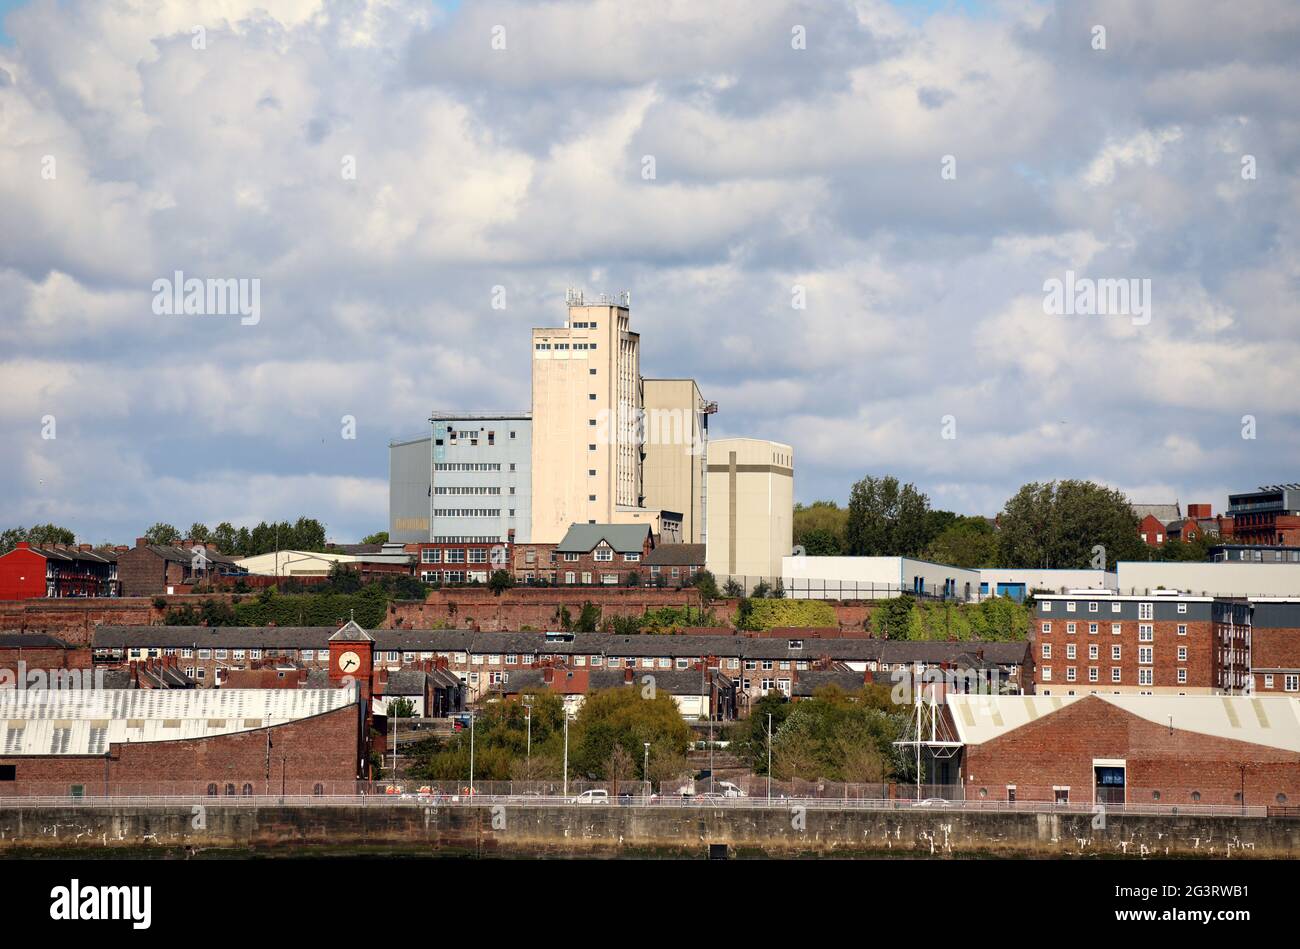 View of Archer Daniels Midland flour processing plant from the River Mersey Stock Photo